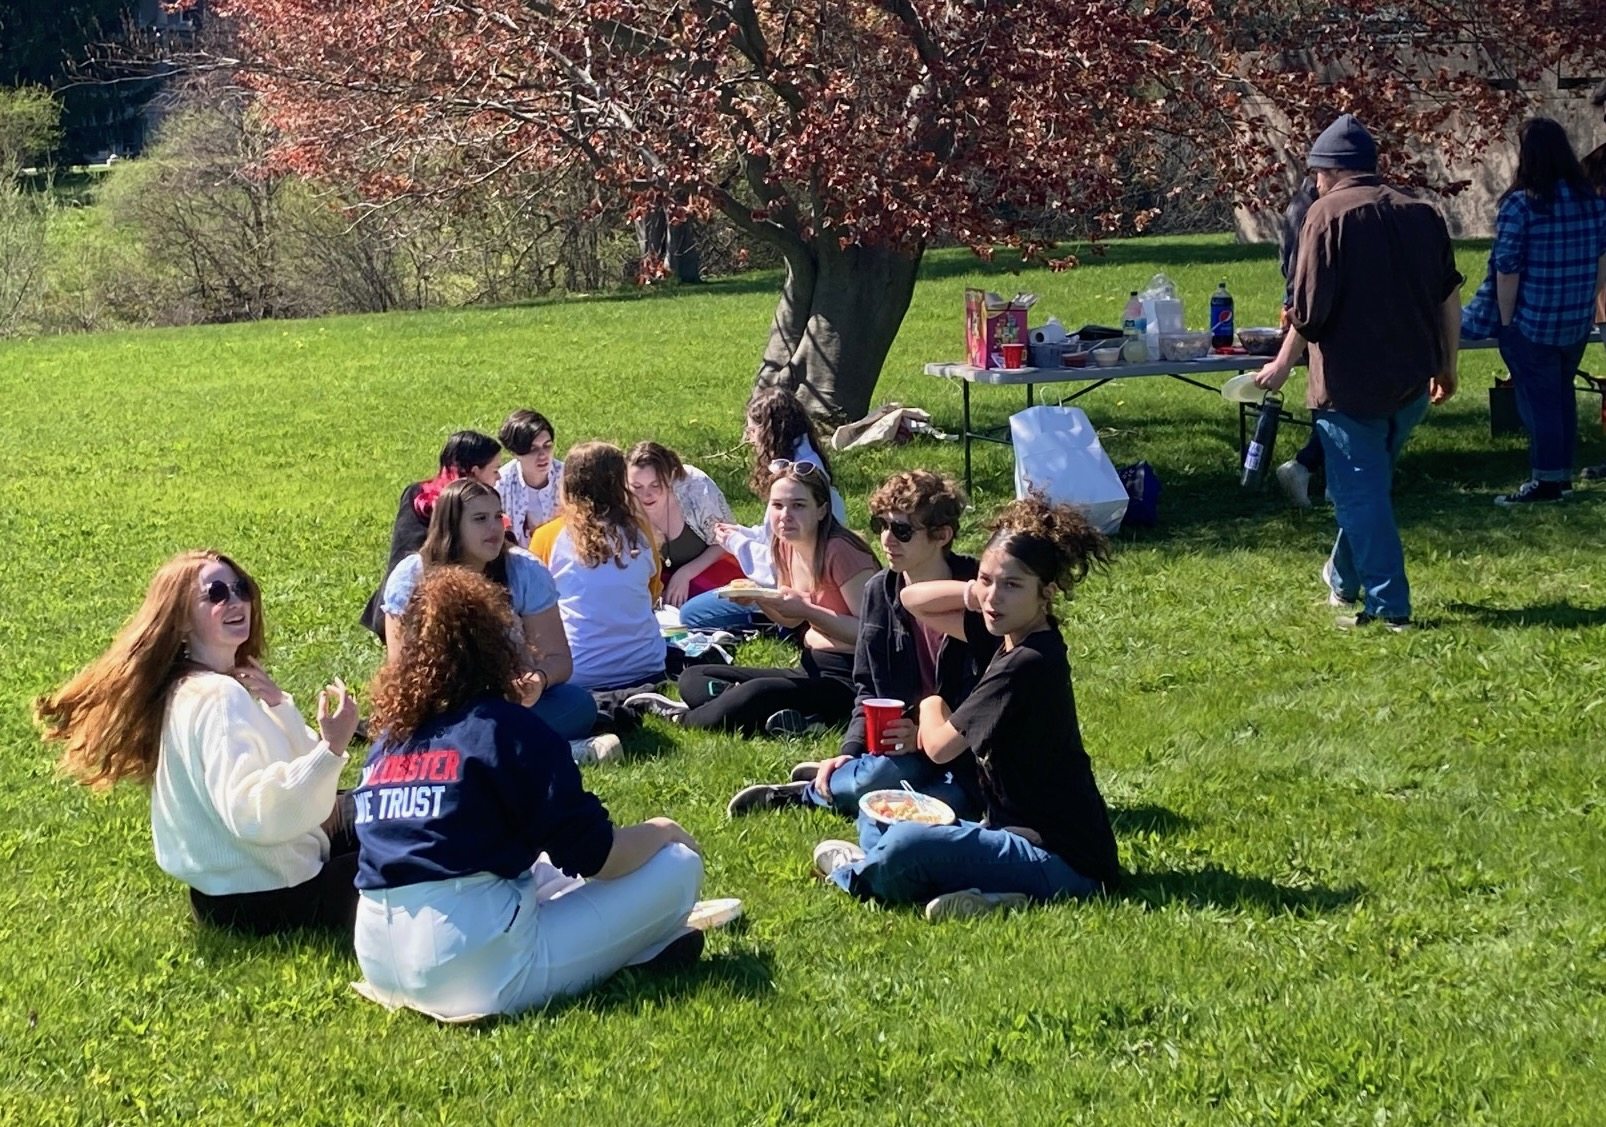 Students outside sitting on the grass